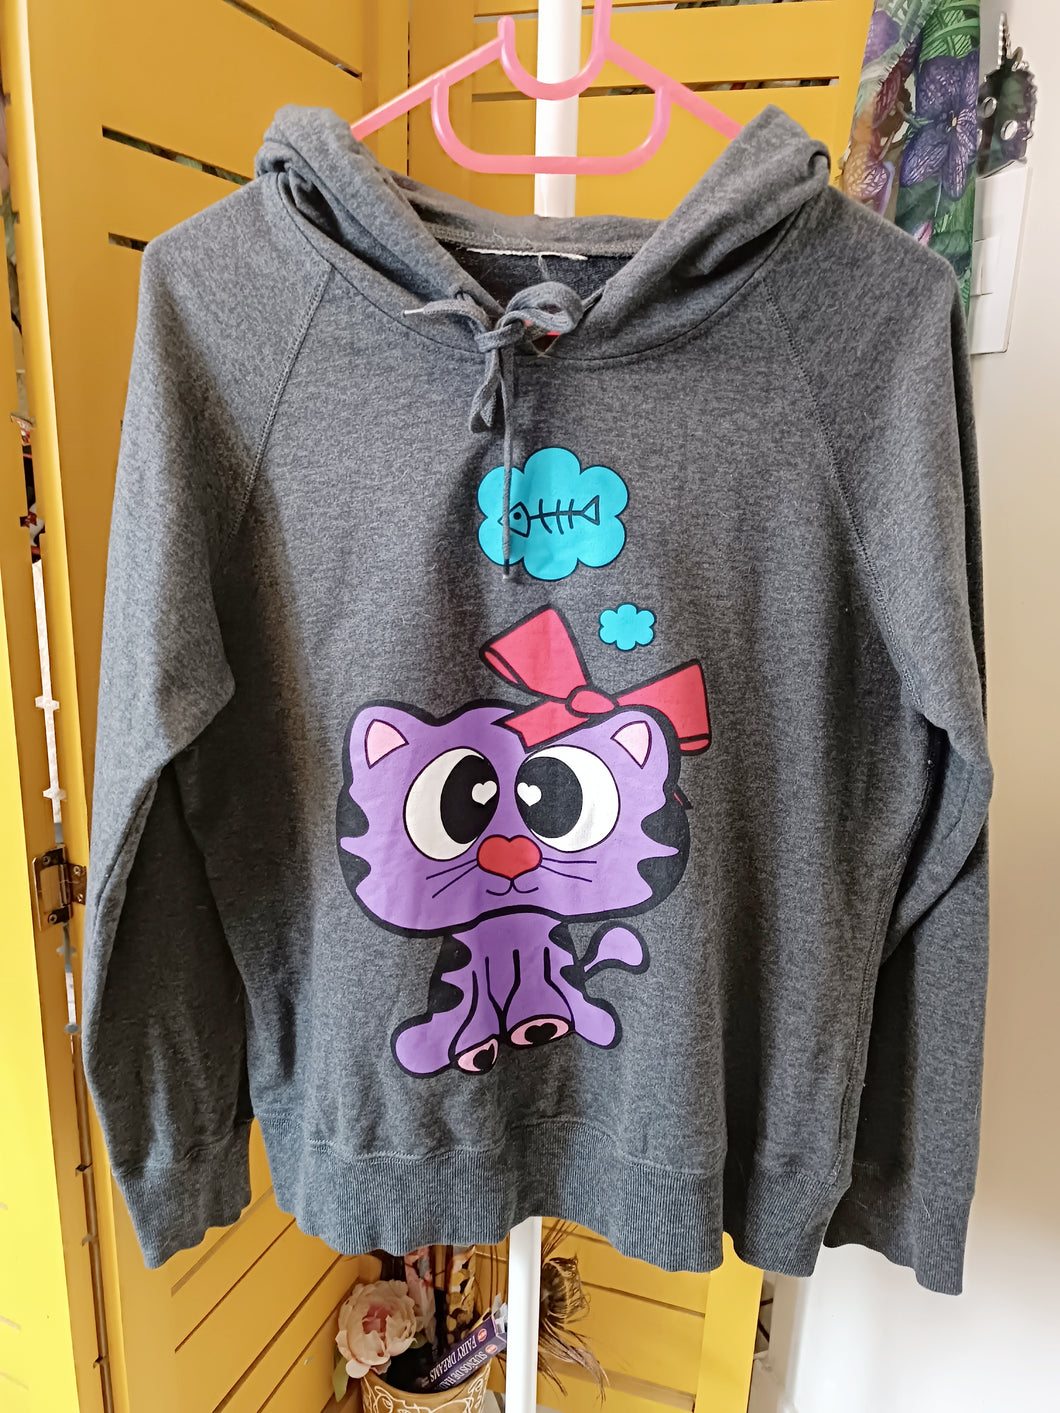 Jay Jays hoodie (no tag but will fit S - M)